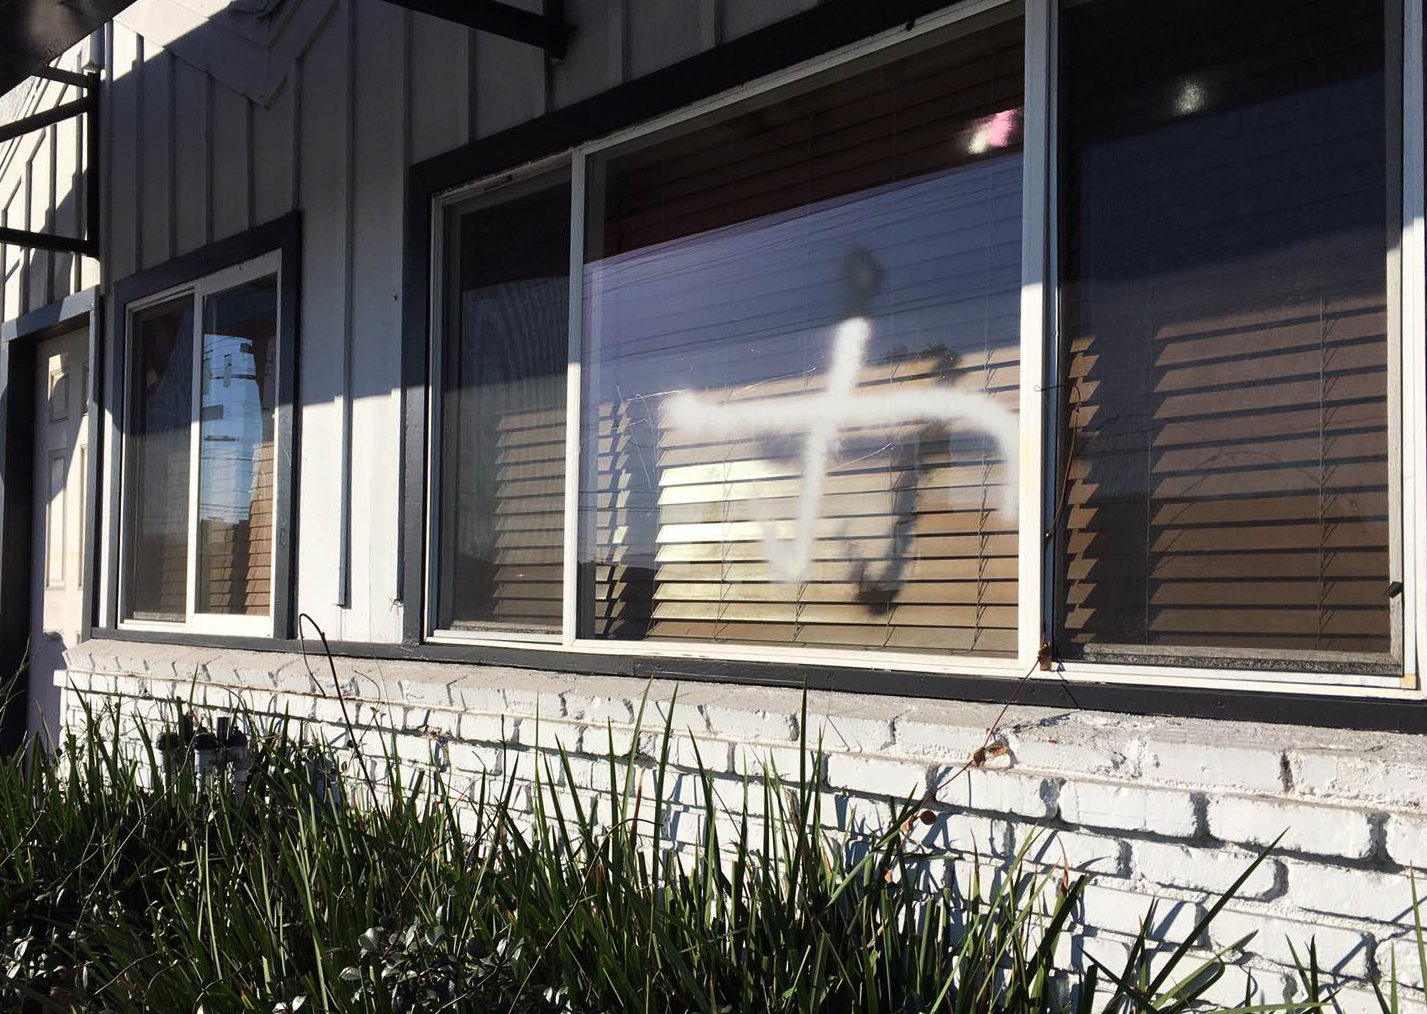 PHOTO:This photo provided by the Ahmadiyya Muslim Community muslimsforpeace.org shows crosses in spray paint vandalizing windows at the Ahmadiyya Muslim Community Baitus-Salaam Mosque in Hawthorne, Calif., Dec. 13, 2015. 